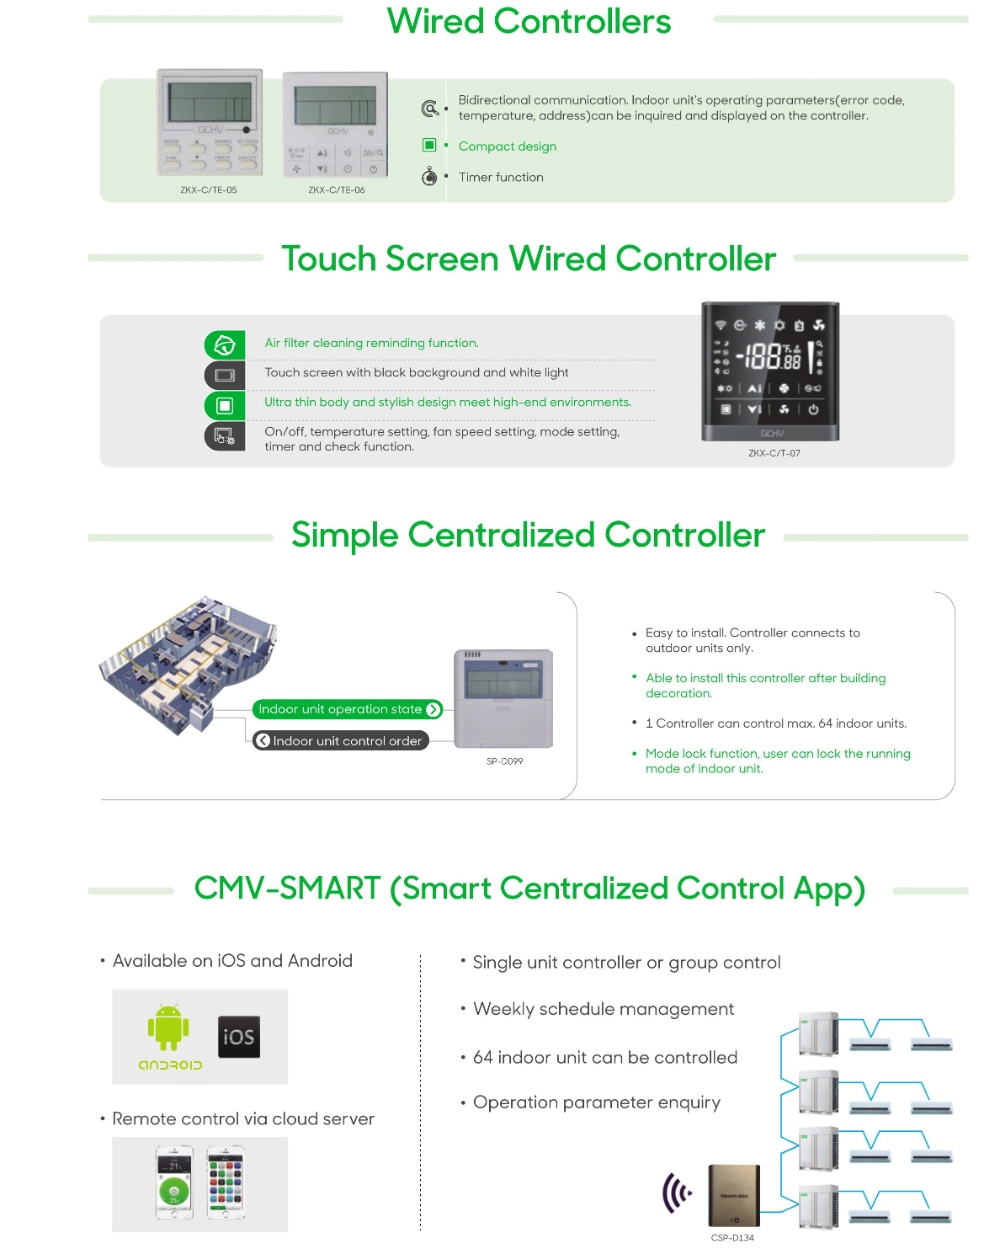 64 Air Conditioners Group Control Centralized Controller for HVAC System